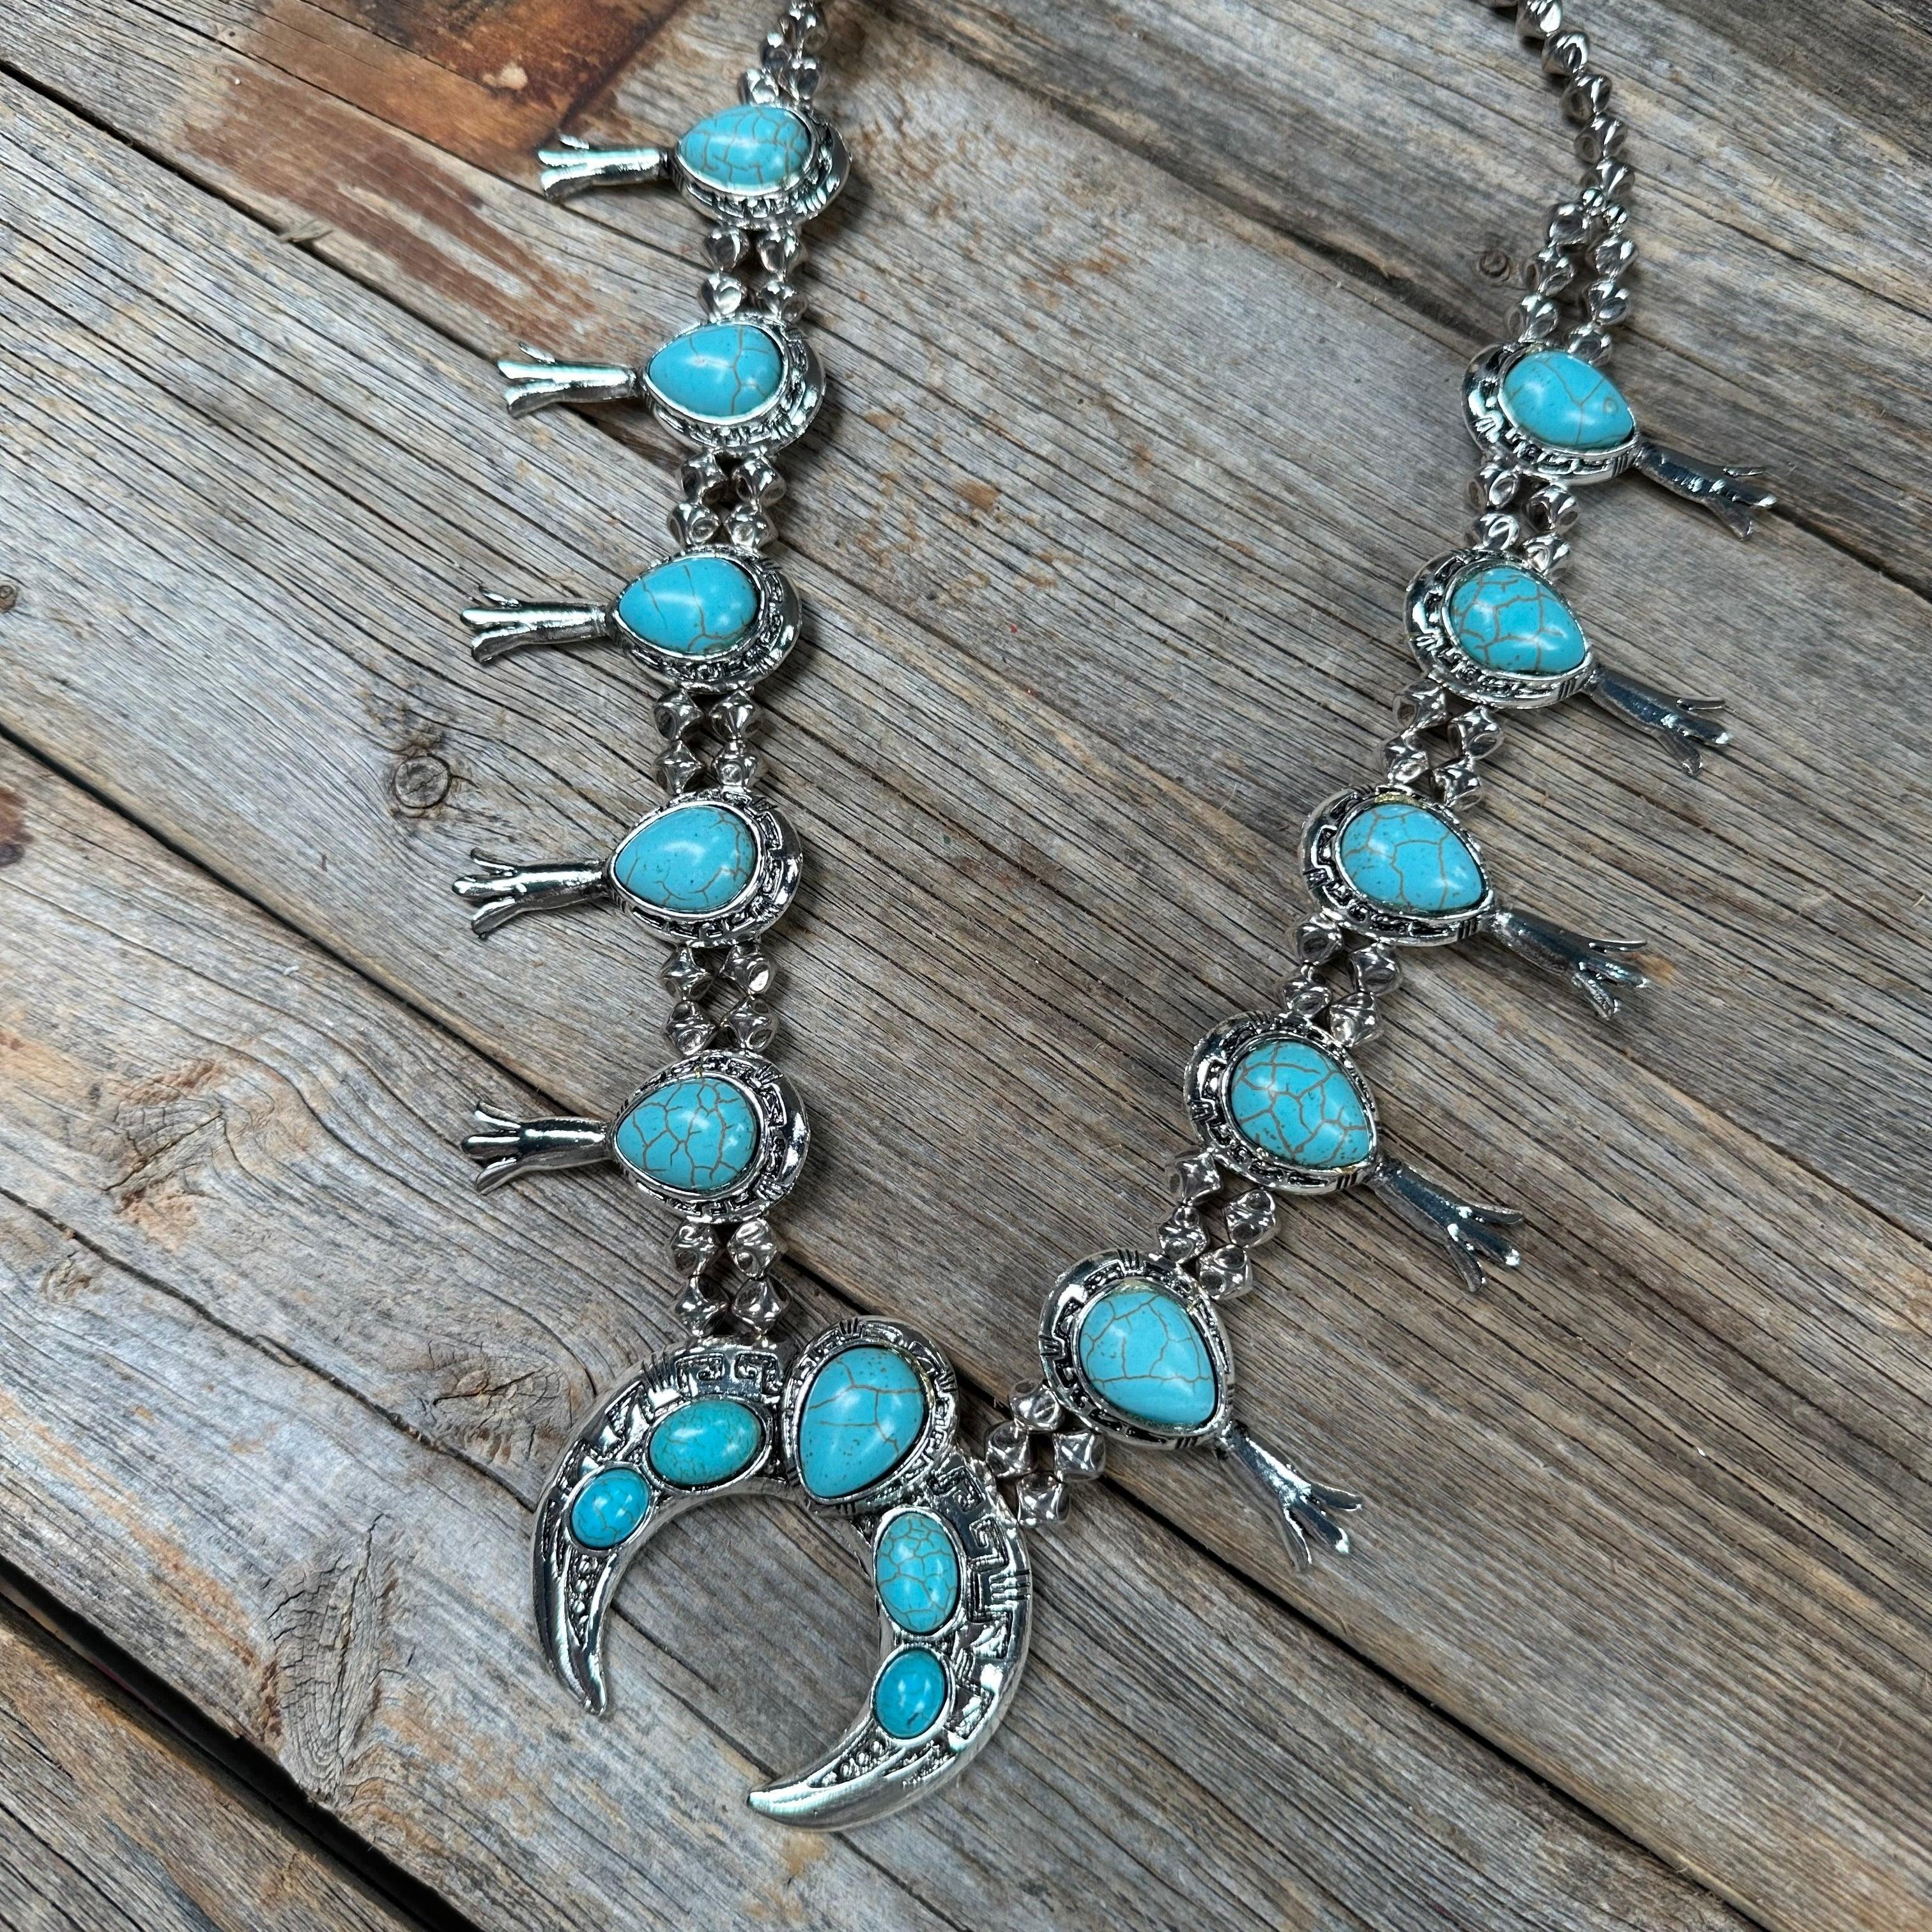 Chunky Turquoise Squash Blossom Fashion Necklace WA213 - RODEO DRIVE